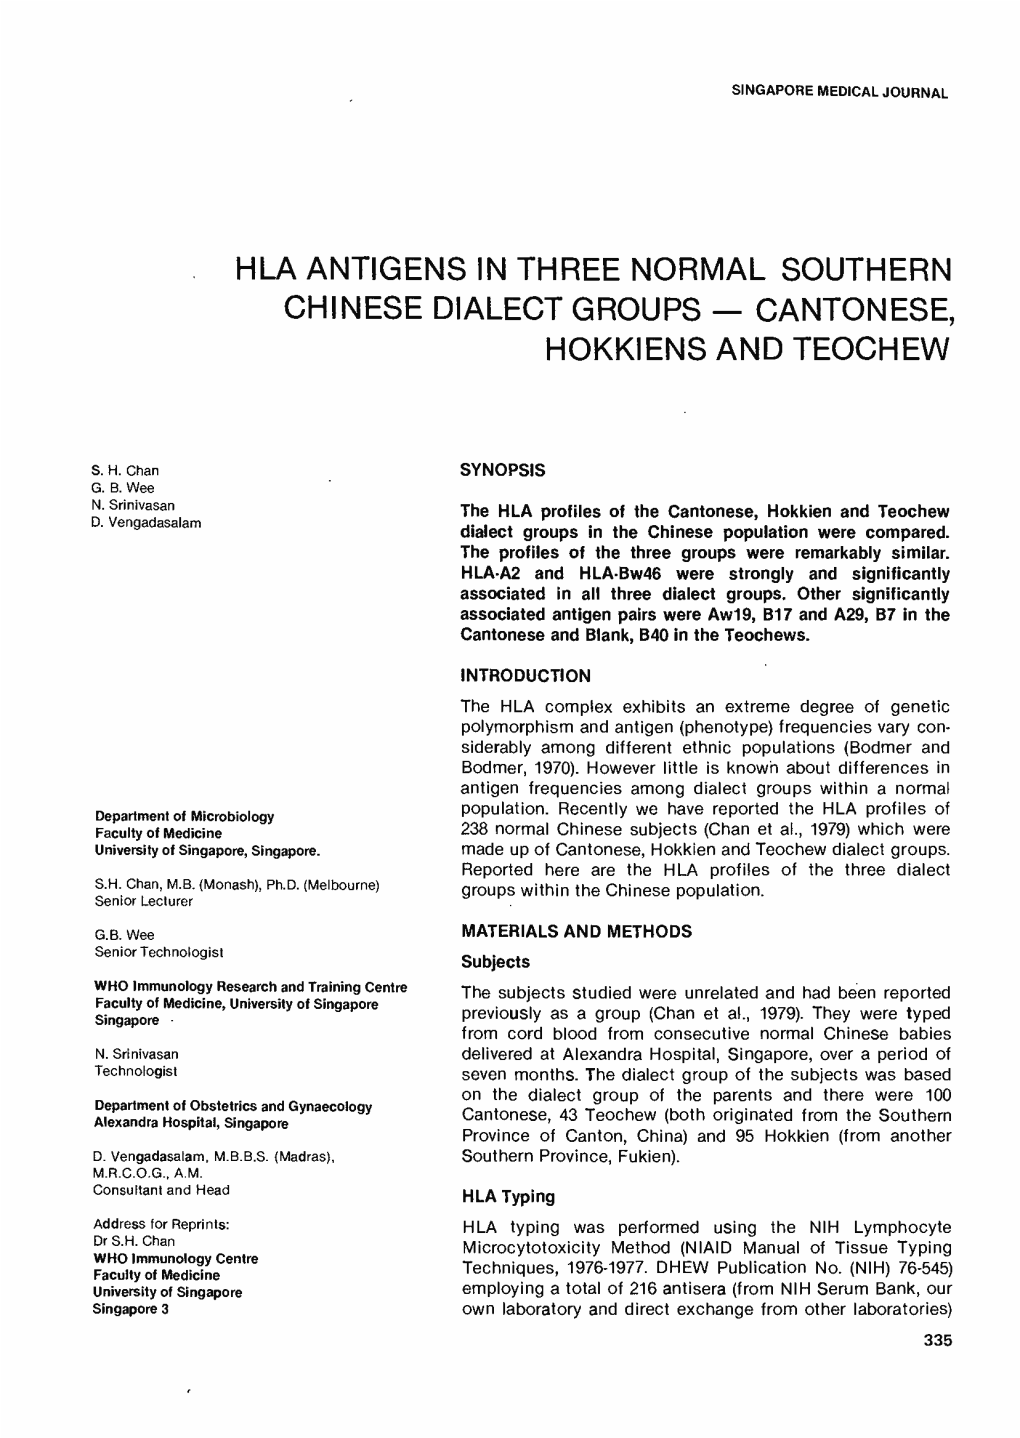 Hla Antigens in Three Normal Southern Chinese Dialect Groups - Cantonese, Hokkiens and Teochew